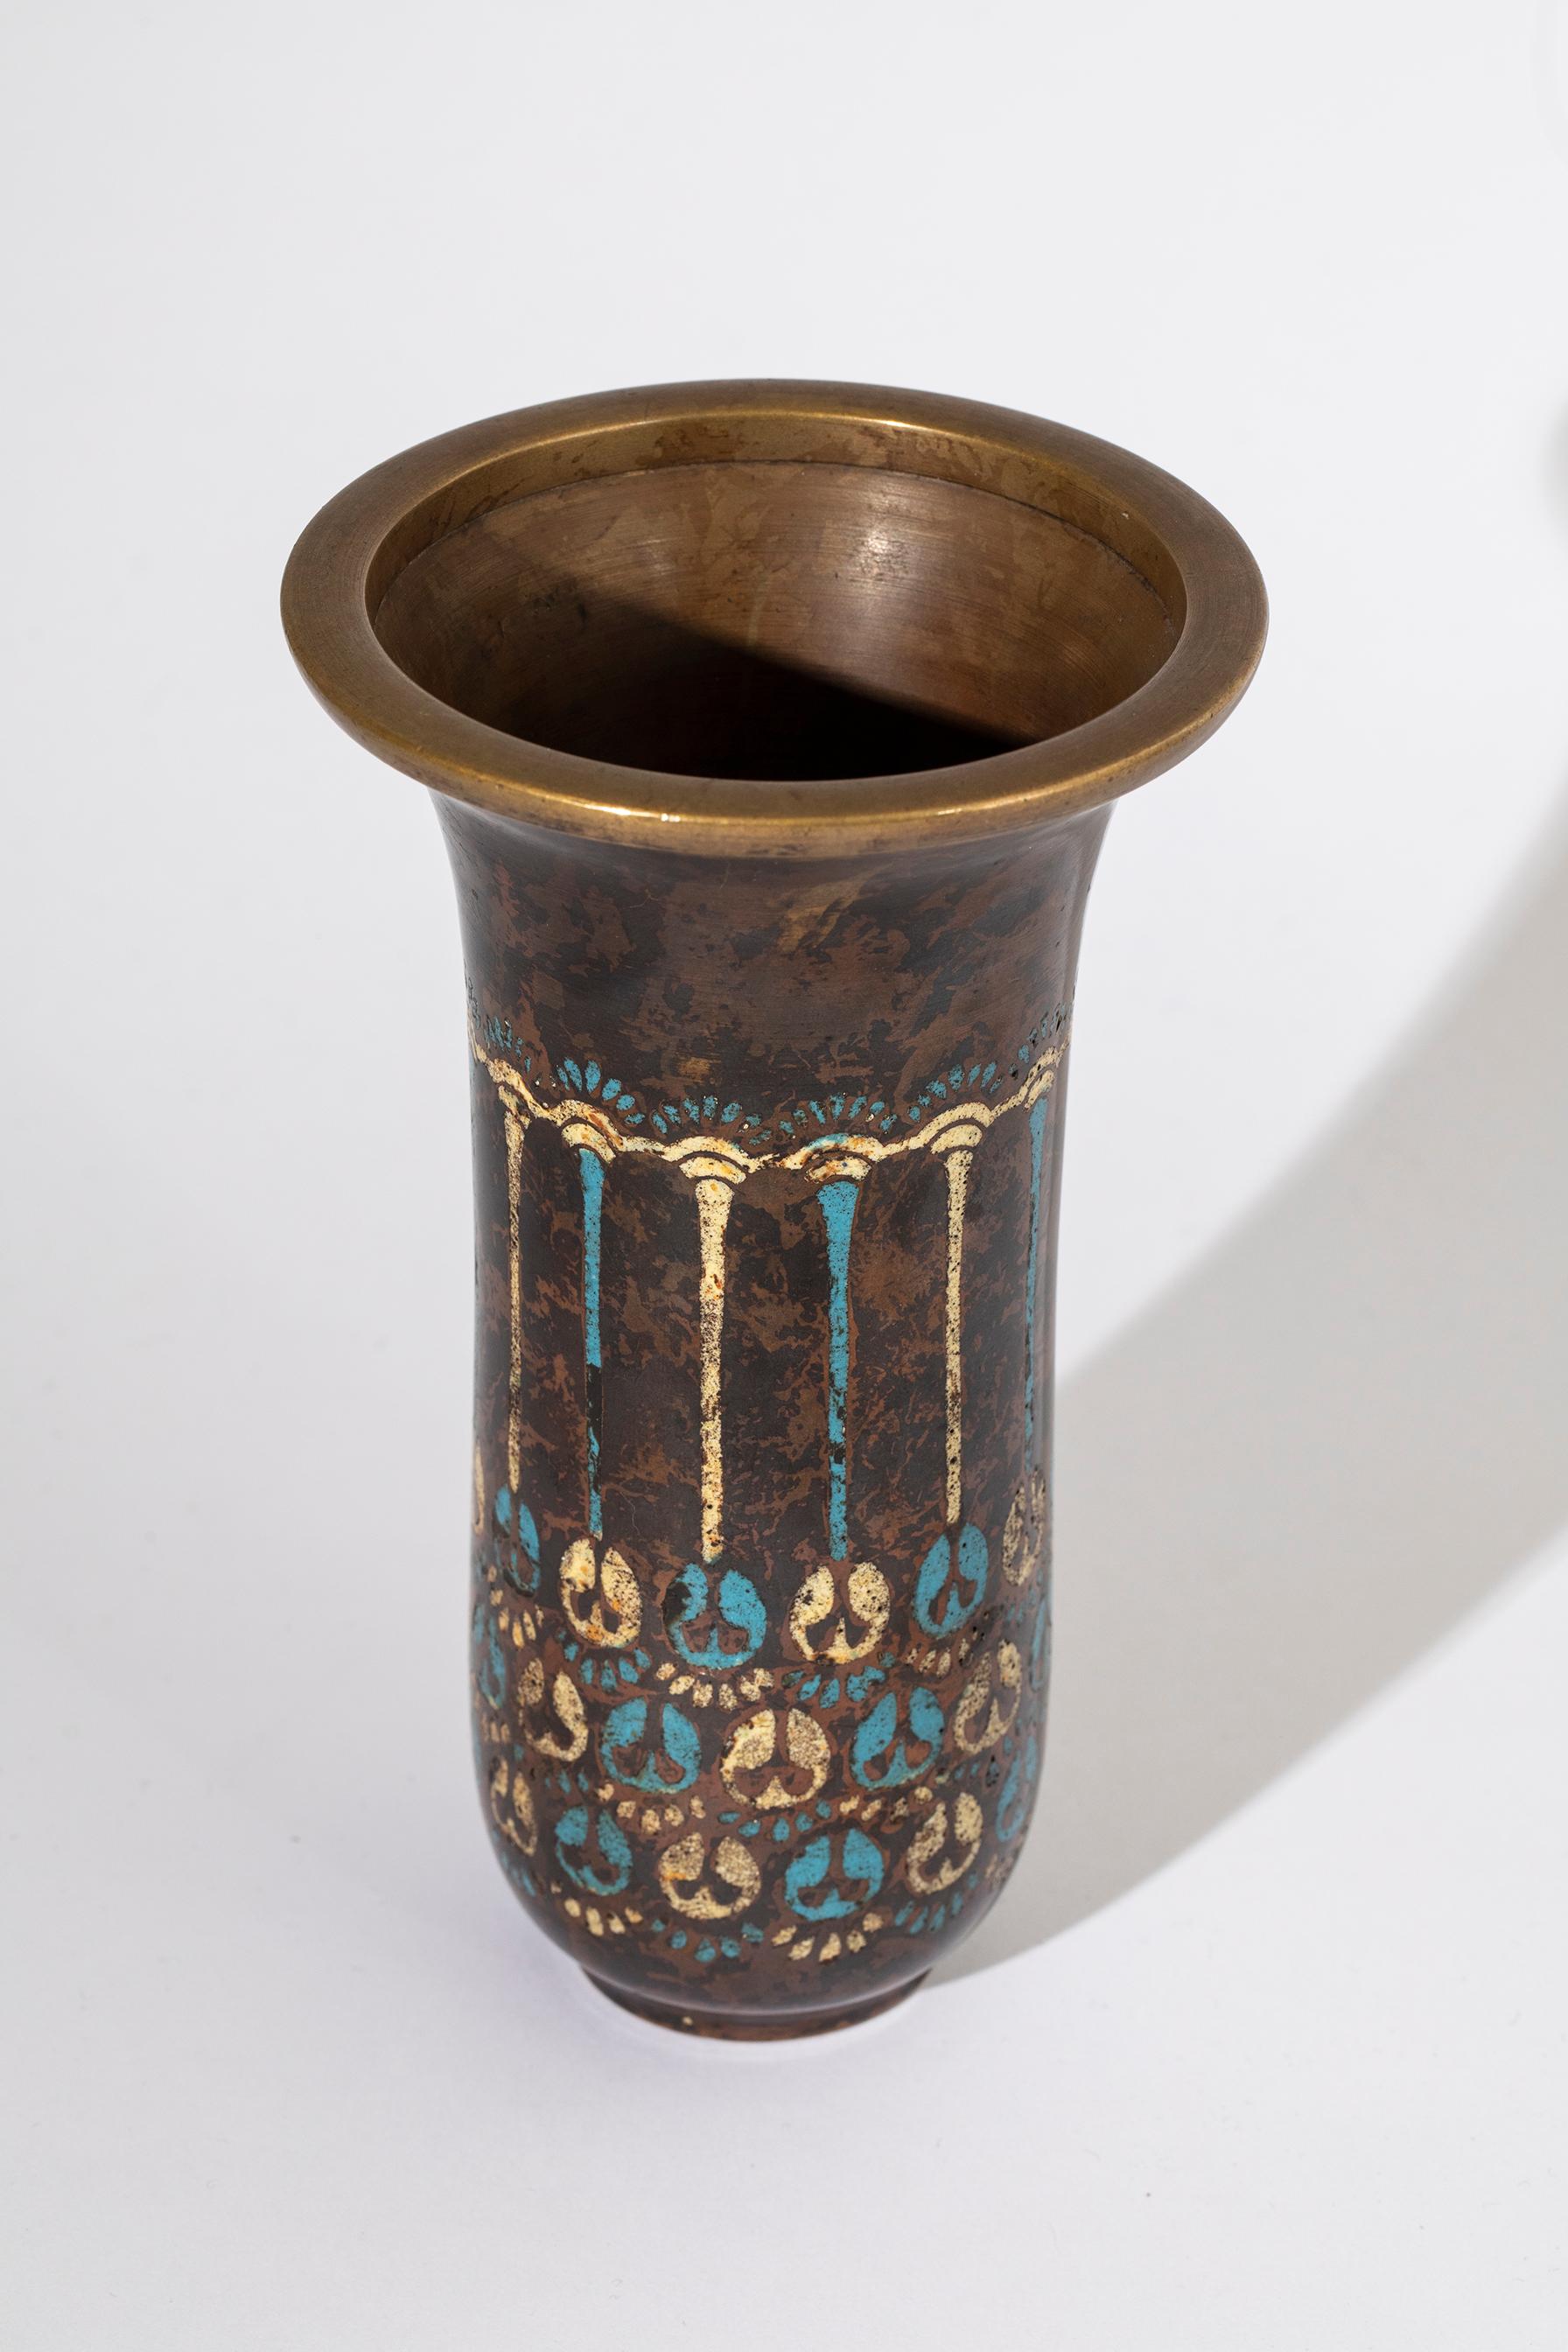 Beautiful cloisonné brass vase with floral motifs in shades of brown, white, and blue. It has a flared bell shape with a beautiful patina and a very high quality of materials. Condition good. 